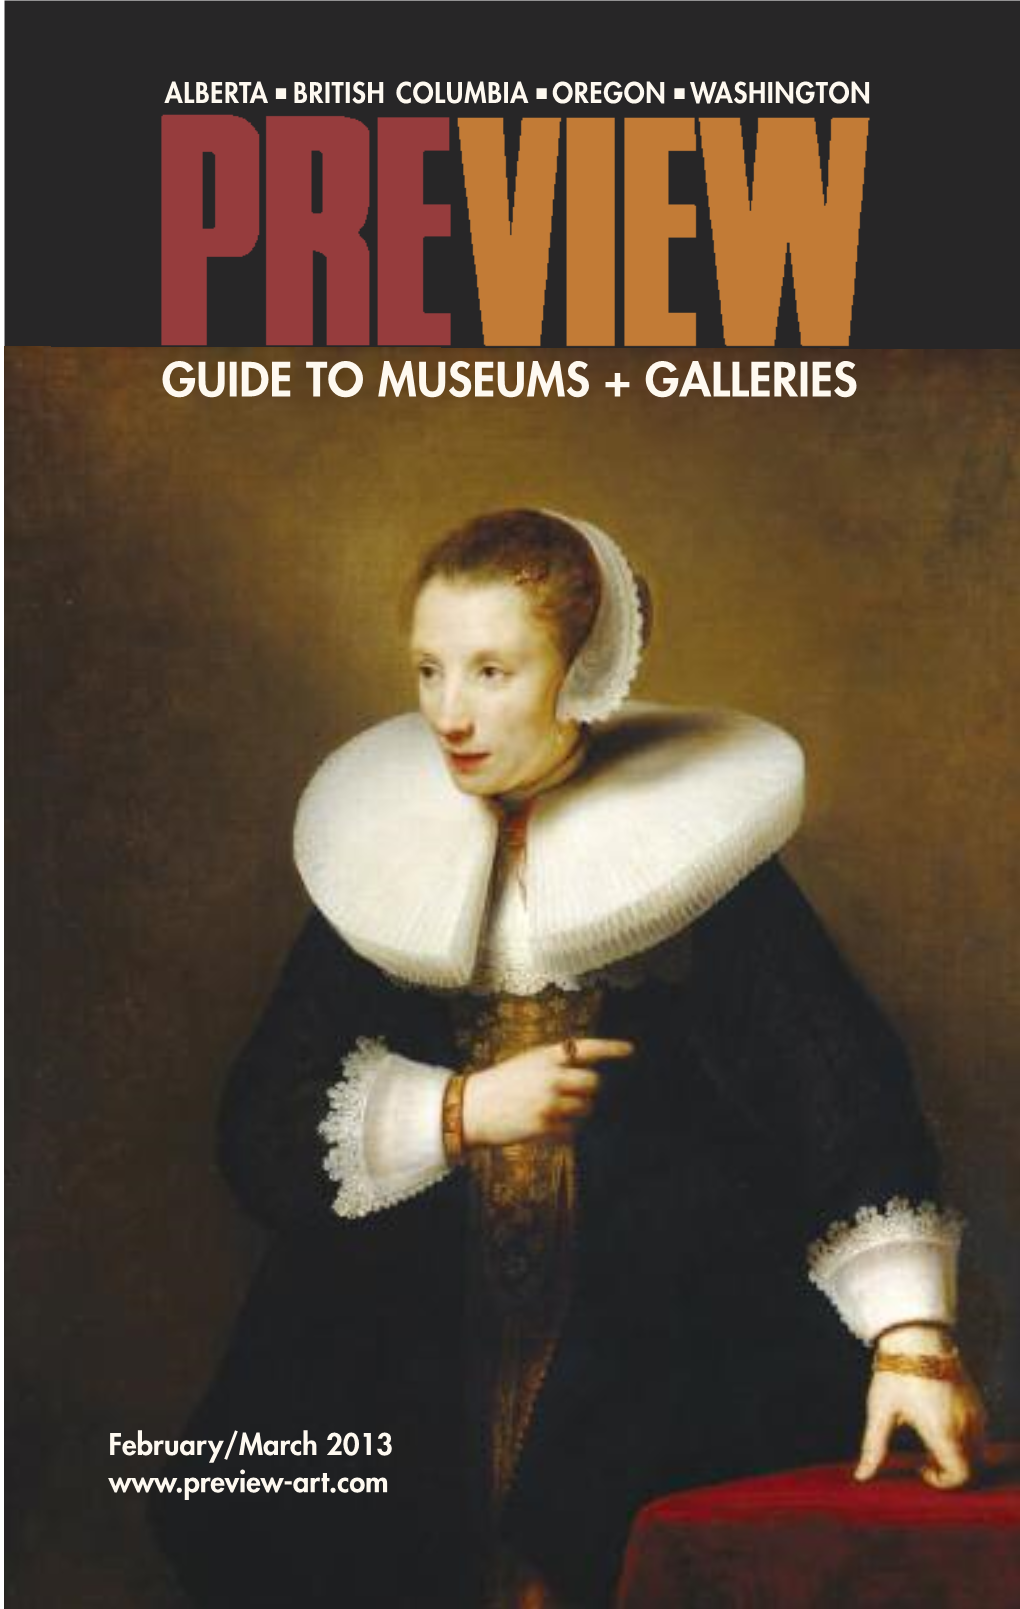 Guide to Museums + Galleries